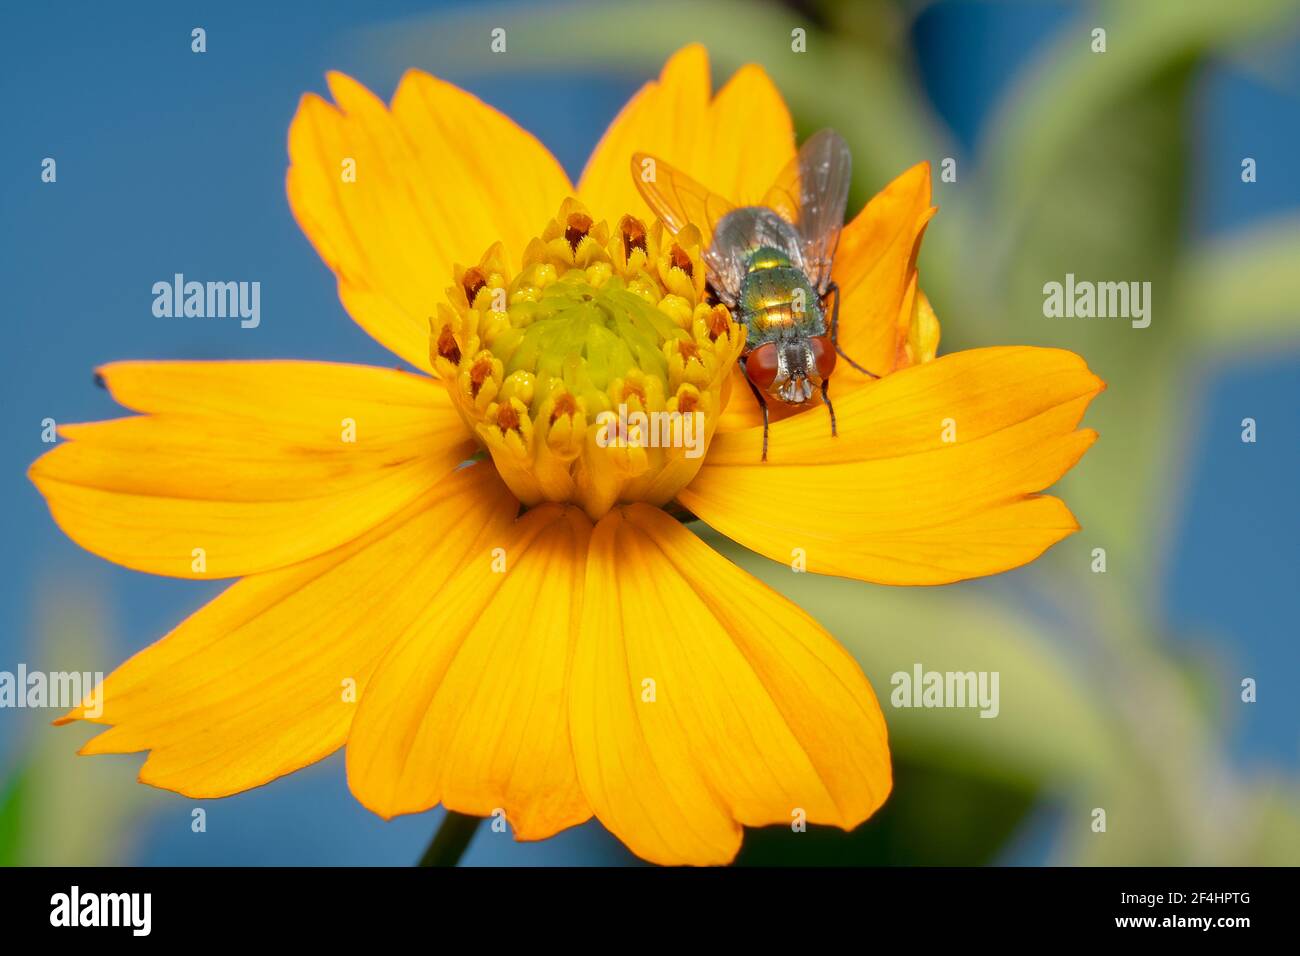 Shiny housefly with big eyes resting on a yellow gerbera daisy flower Stock Photo